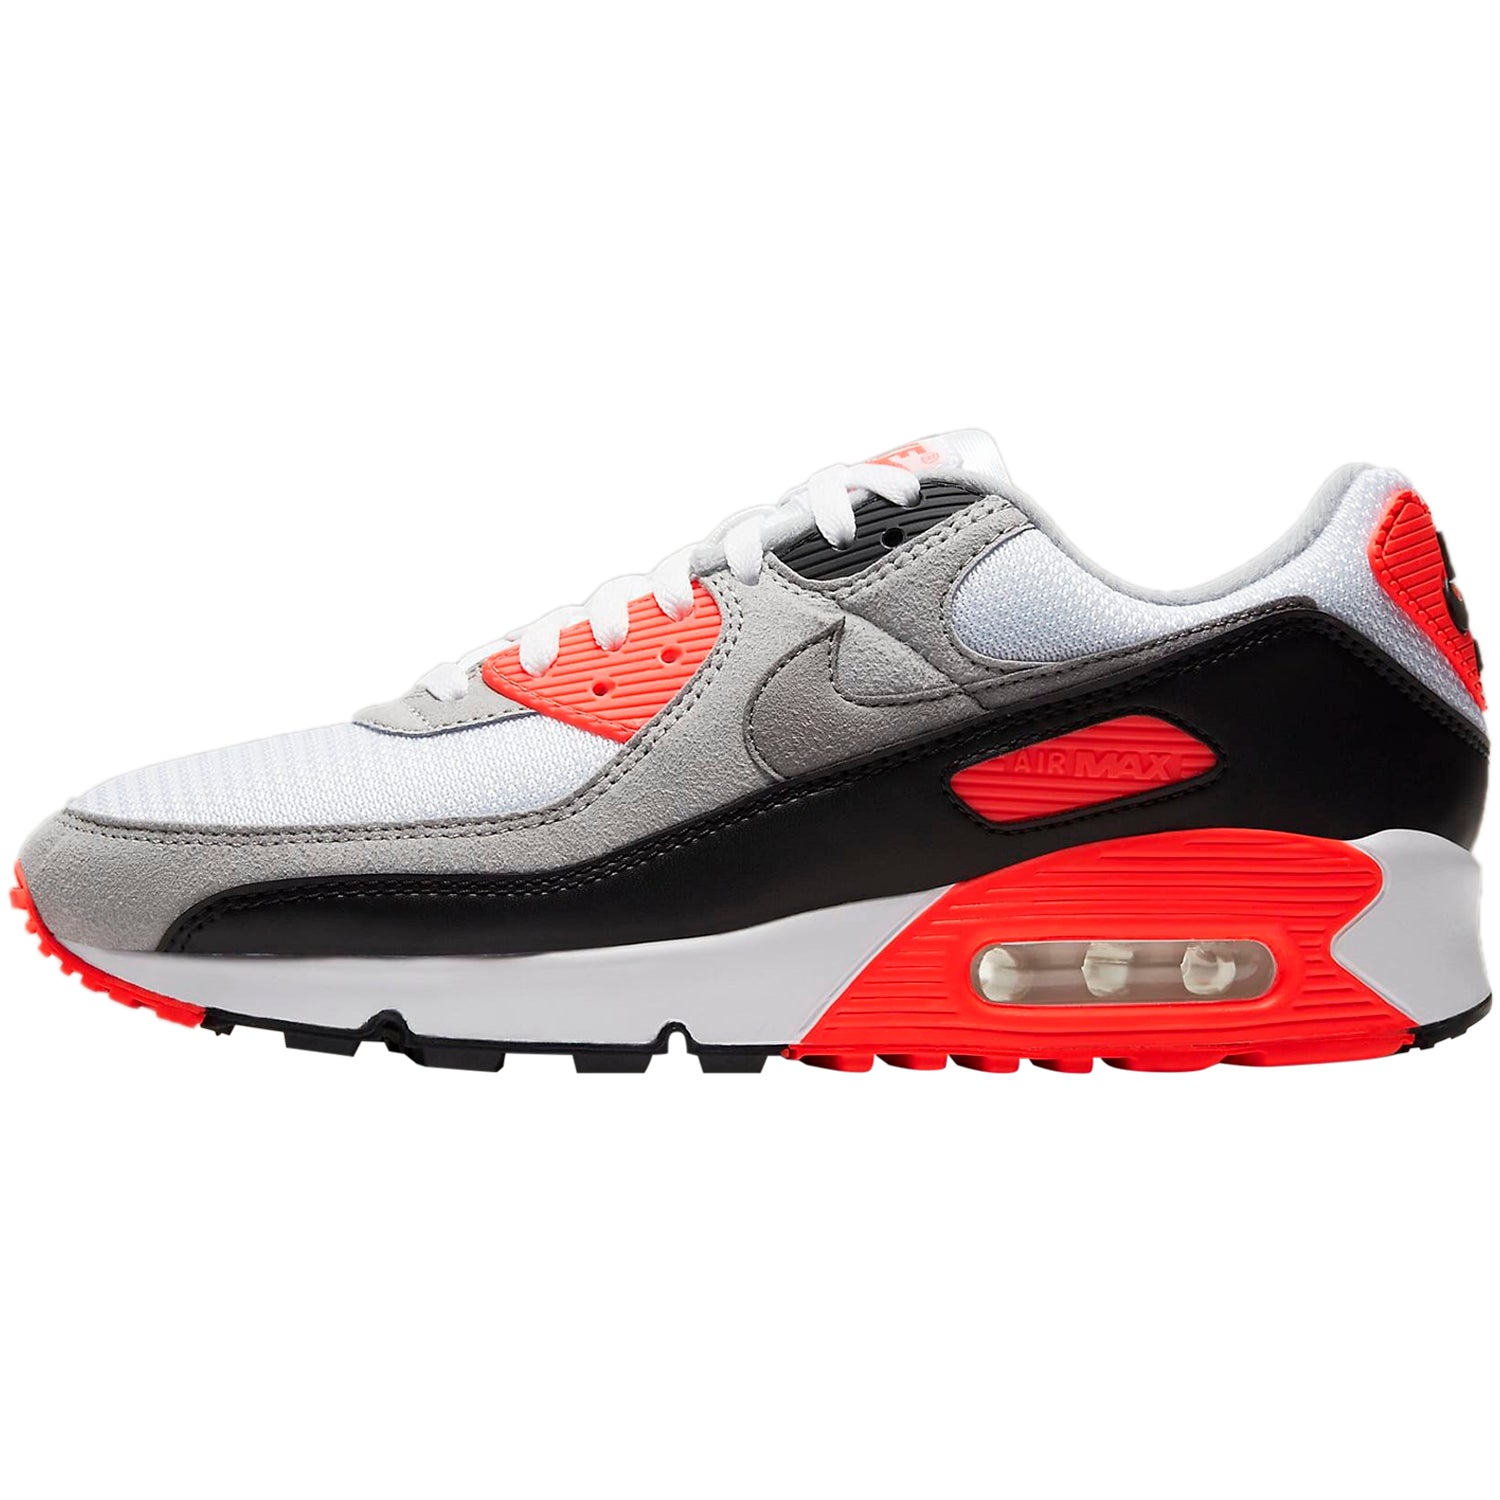 Nike Air Max 90 "Infrared 2020" Mens Sneaker Style CT1685-100